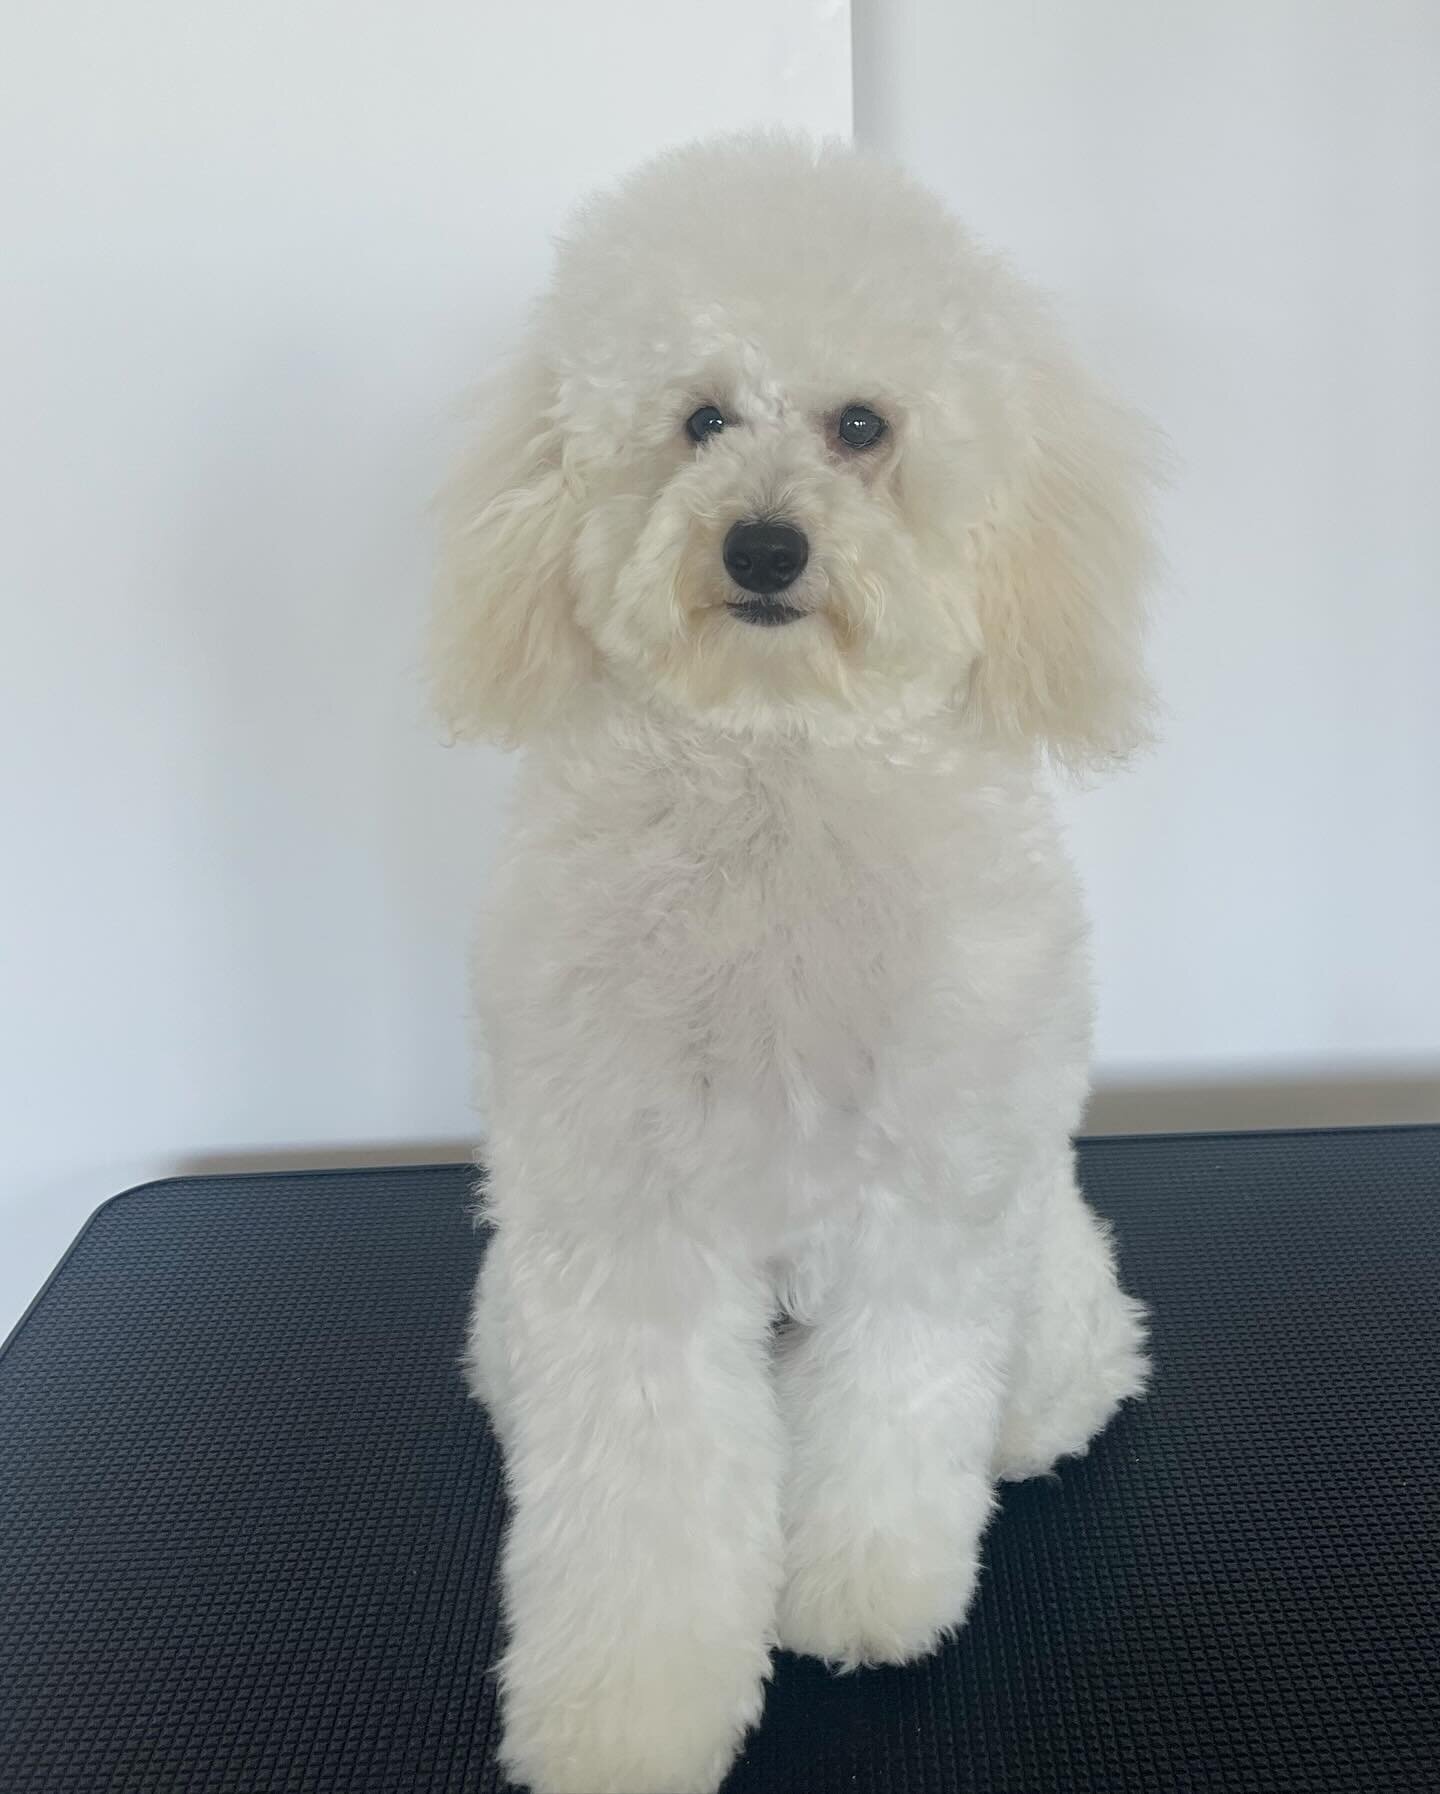 ➡️ Swipe for big girl haircut ! 🐾 Gabbi has been slowly getting used to the grooming process over the last few months and she is doing so well! She is looking more like a little lady now, rather than a cotton ball. ☁️🐶 

#gandtessentials #fluffy #d